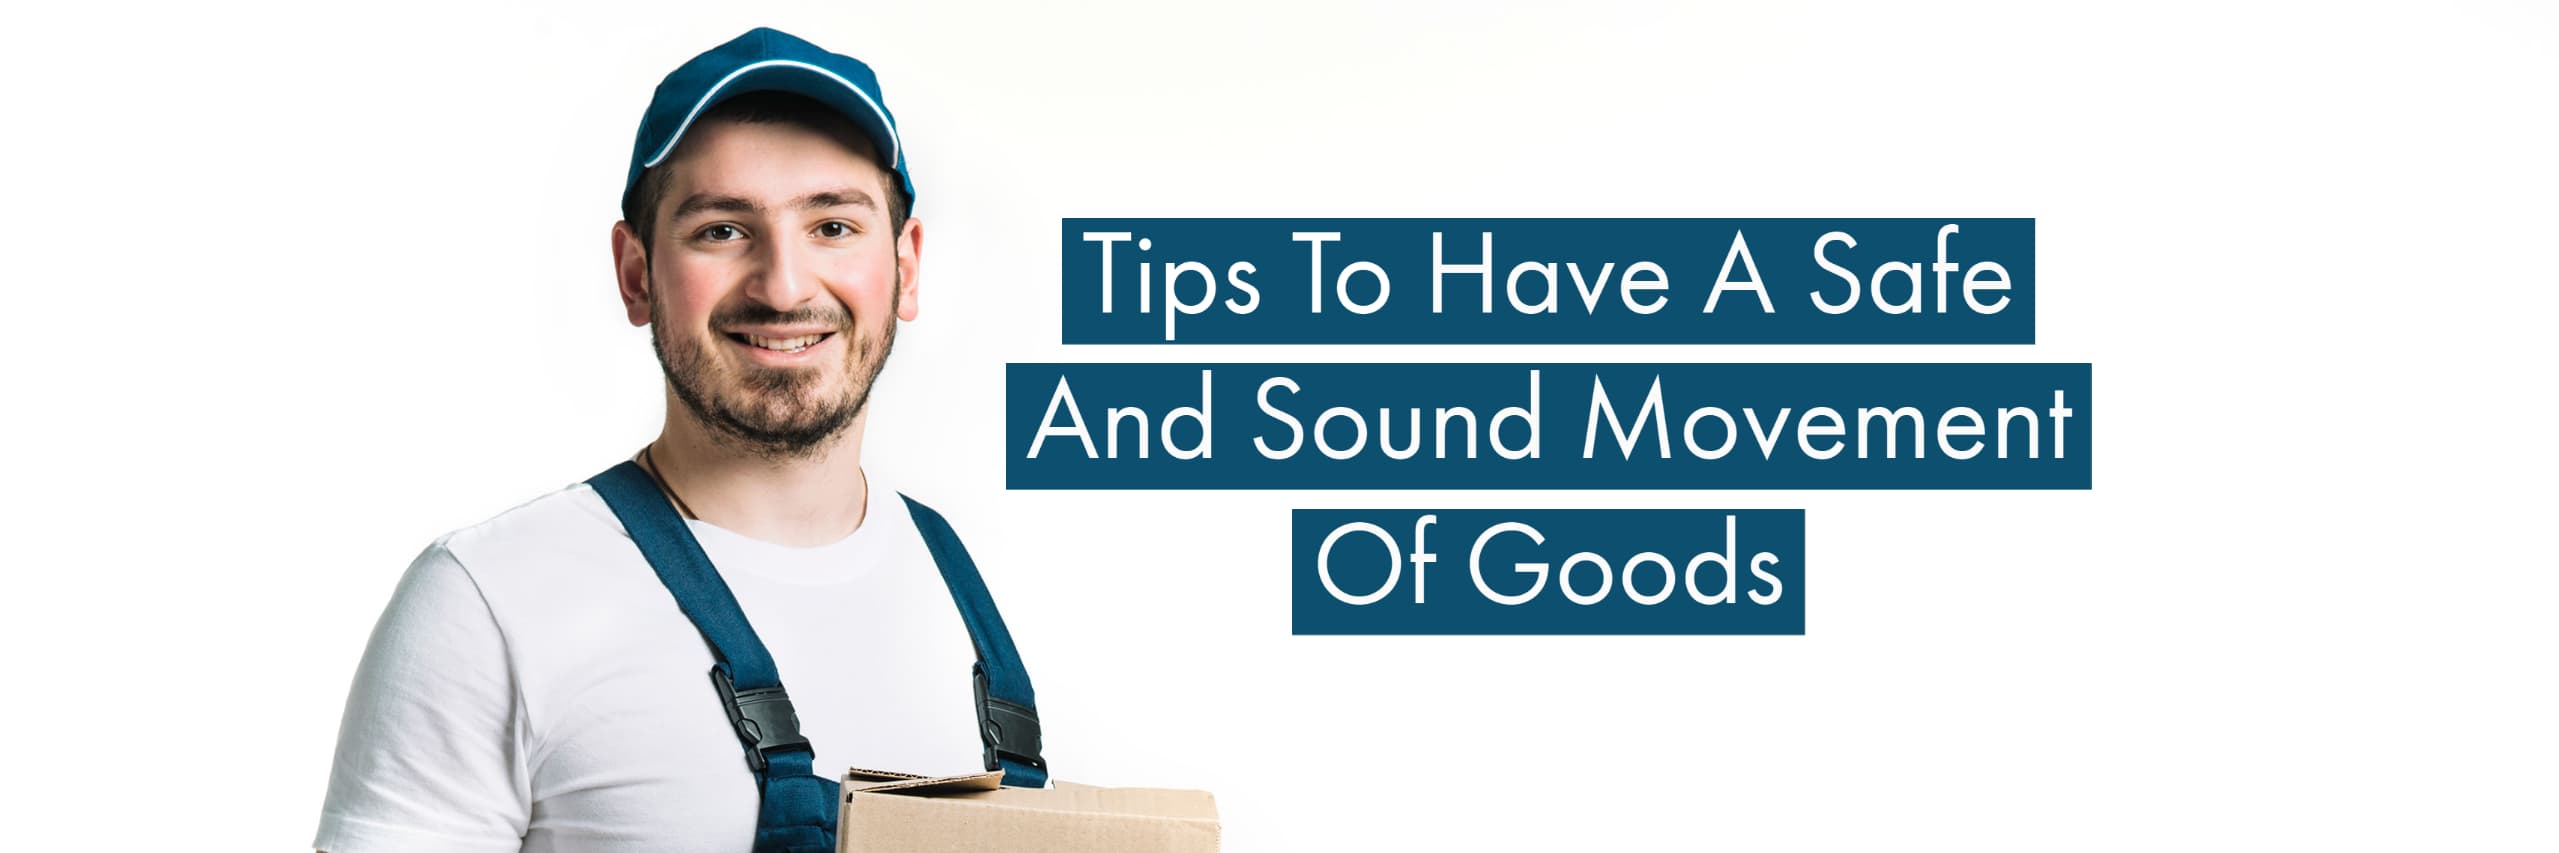 Tips To Have A Safe And Sound Movement Of Goods